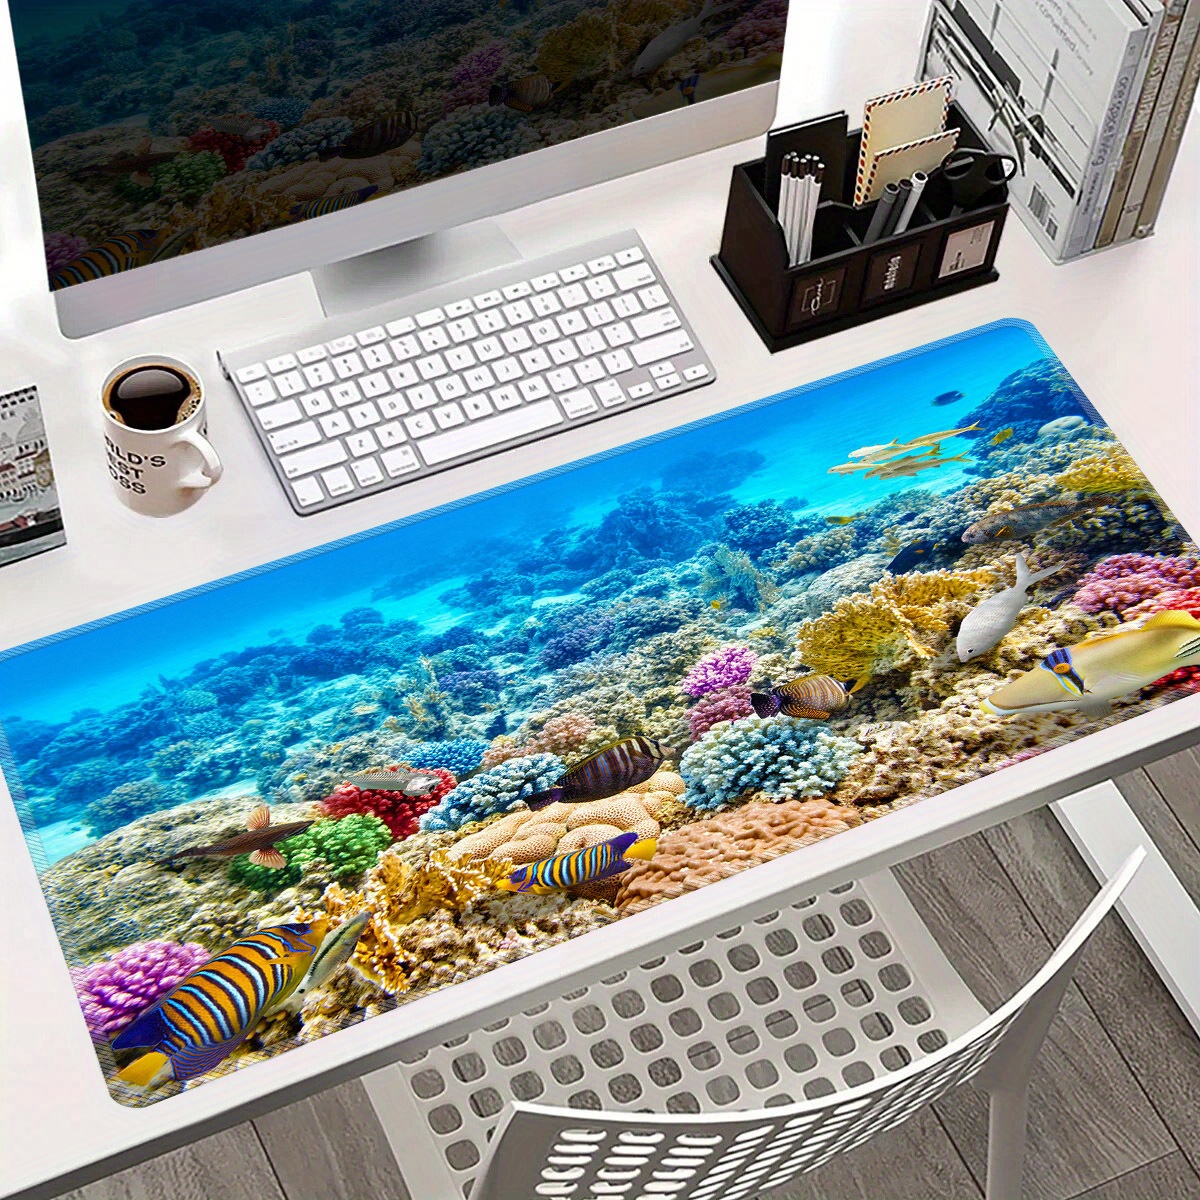 

Underwater World Pattern Large Mouse Pad 35.4*15.7inch - Non-slip, Washable Rubber Desk Mat For Laptop, Keyboard - Comfortable Writing Surface, Perfect For Gaming, Office, And Gifts For Boys And Girls